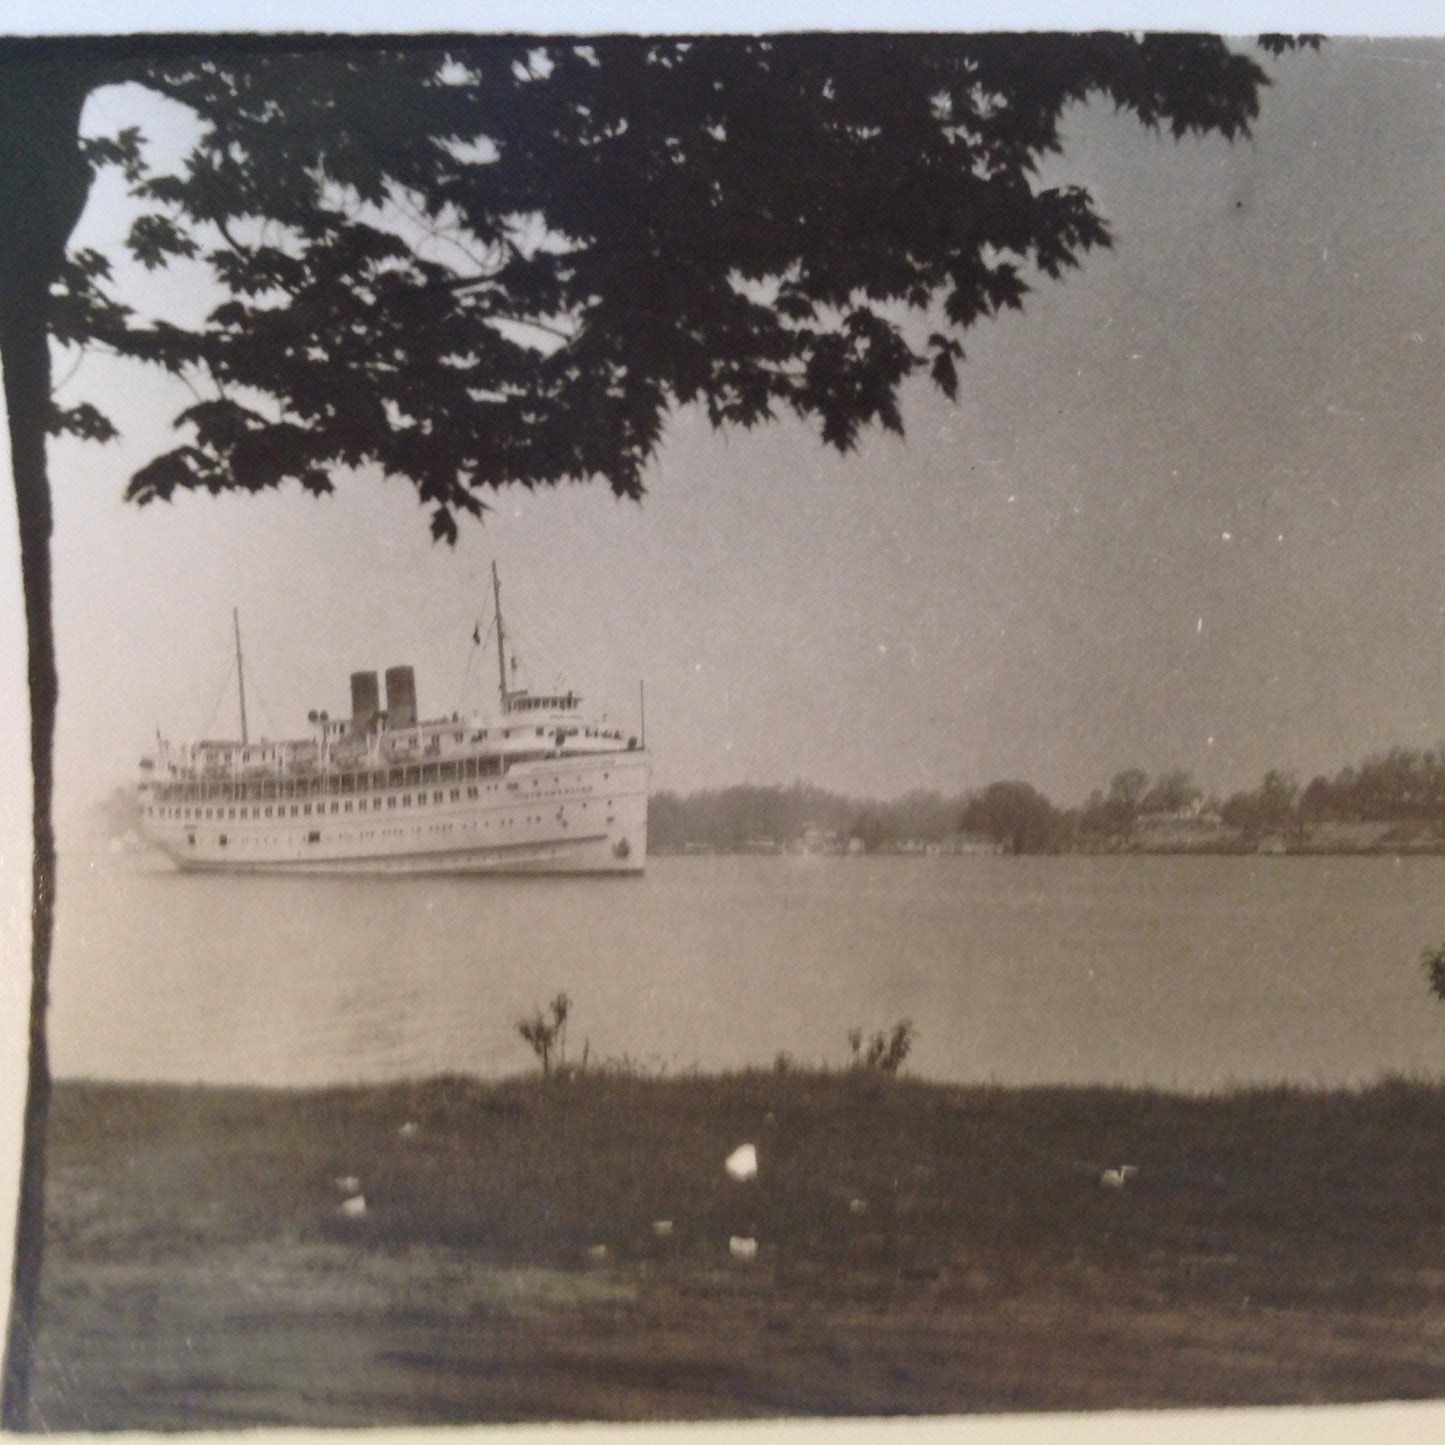 Vintage Mid Century B&W Photo SS South American Cruise Exterior Shot Ship Sailing Seen from Shore